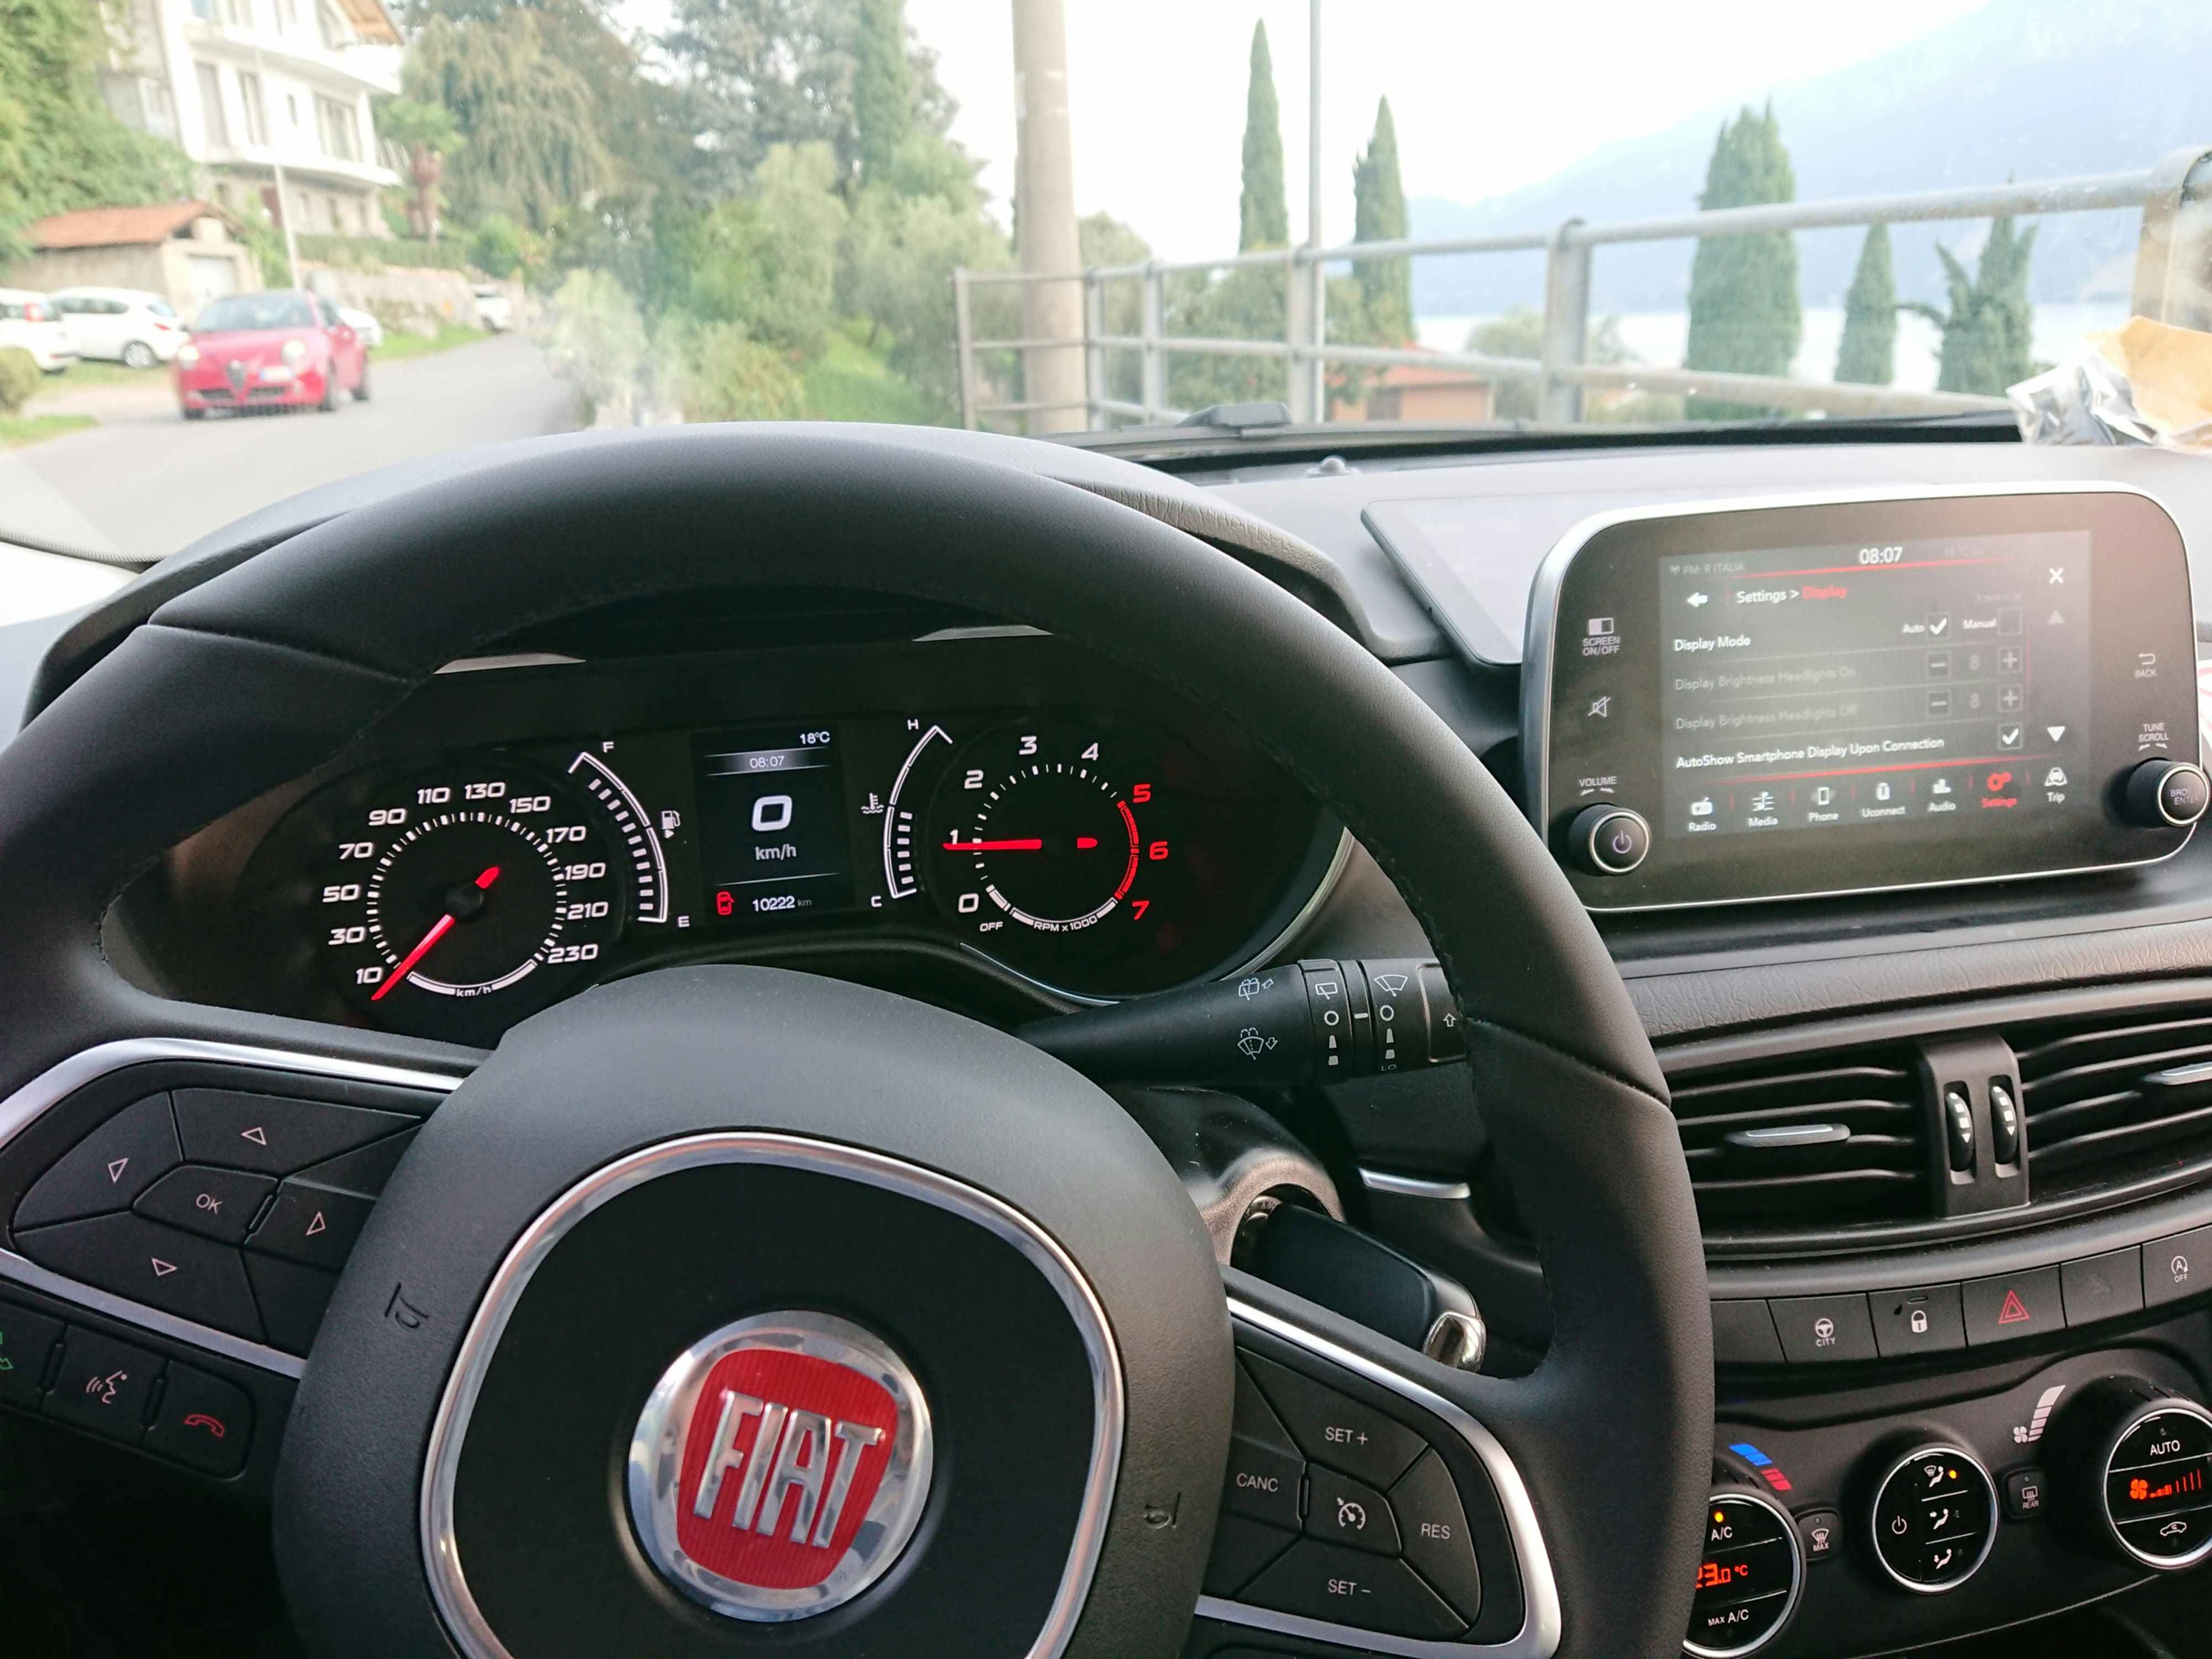 the dashboard of a fiat card showing the MPH and RPM meters